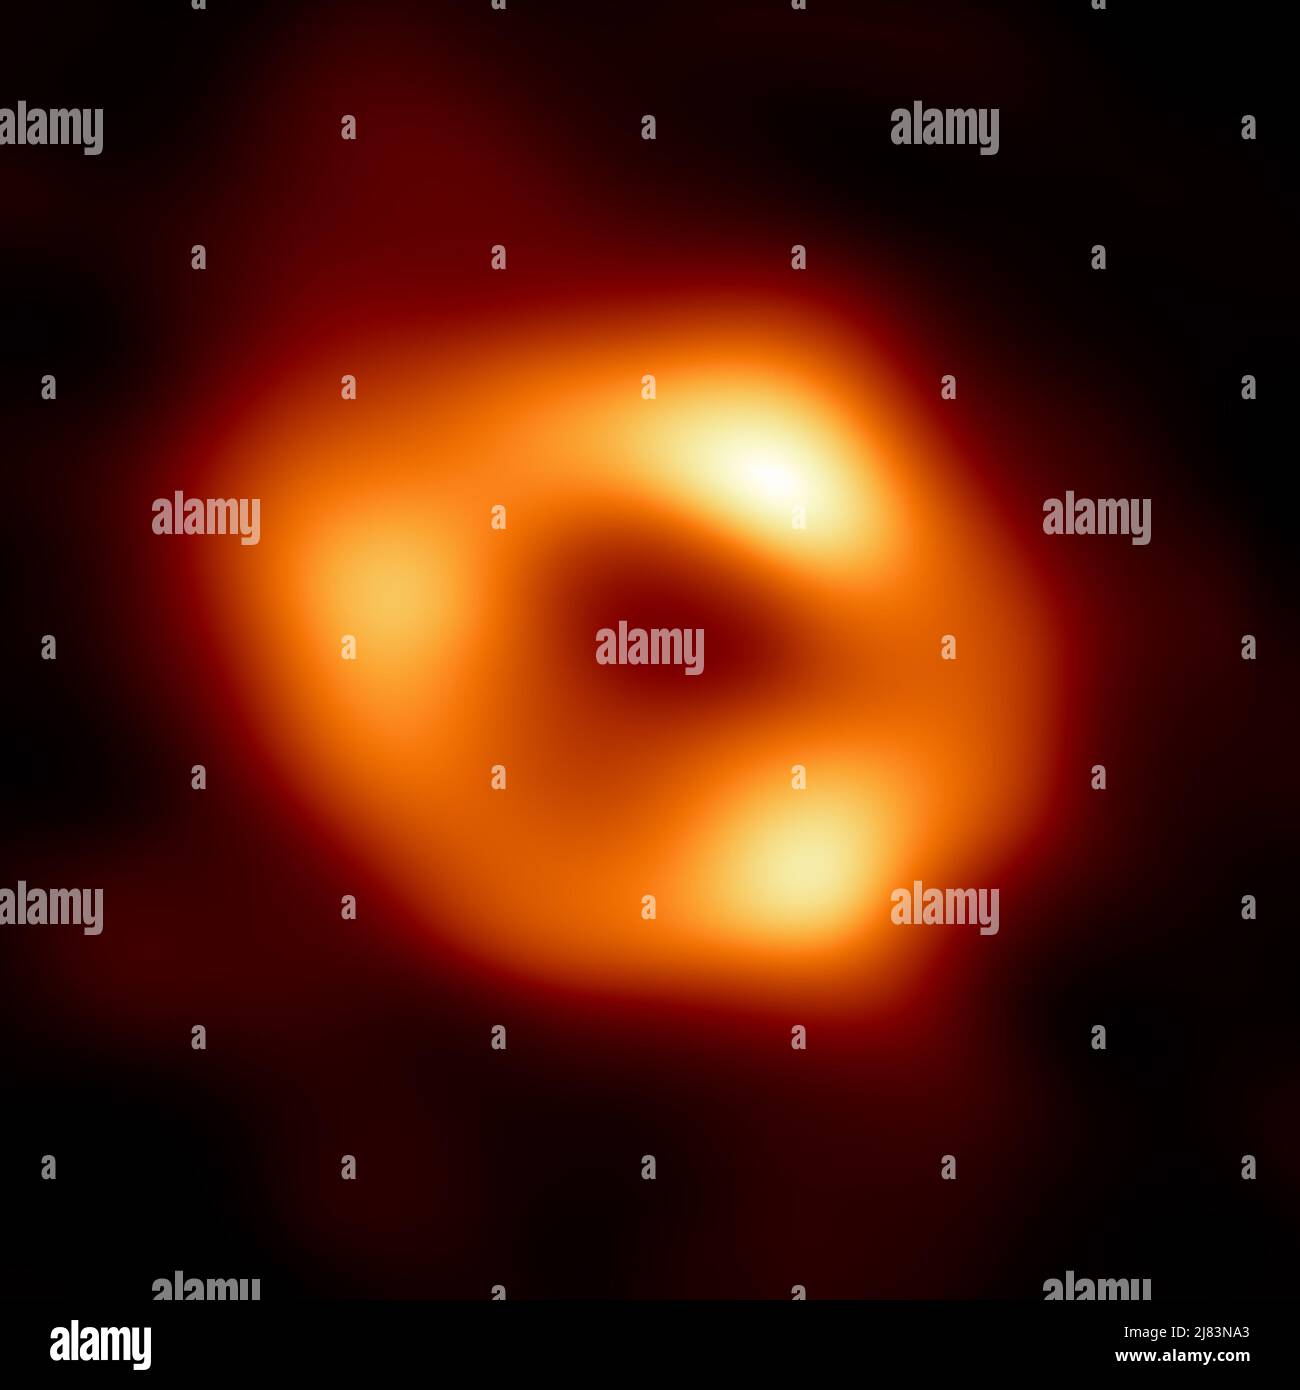 May 12, 2022, Milky Way Galaxy: Radio astronomers have imaged the super  massive black hole at the centre of the Milky Way. It is only the  second-ever direct image of a black